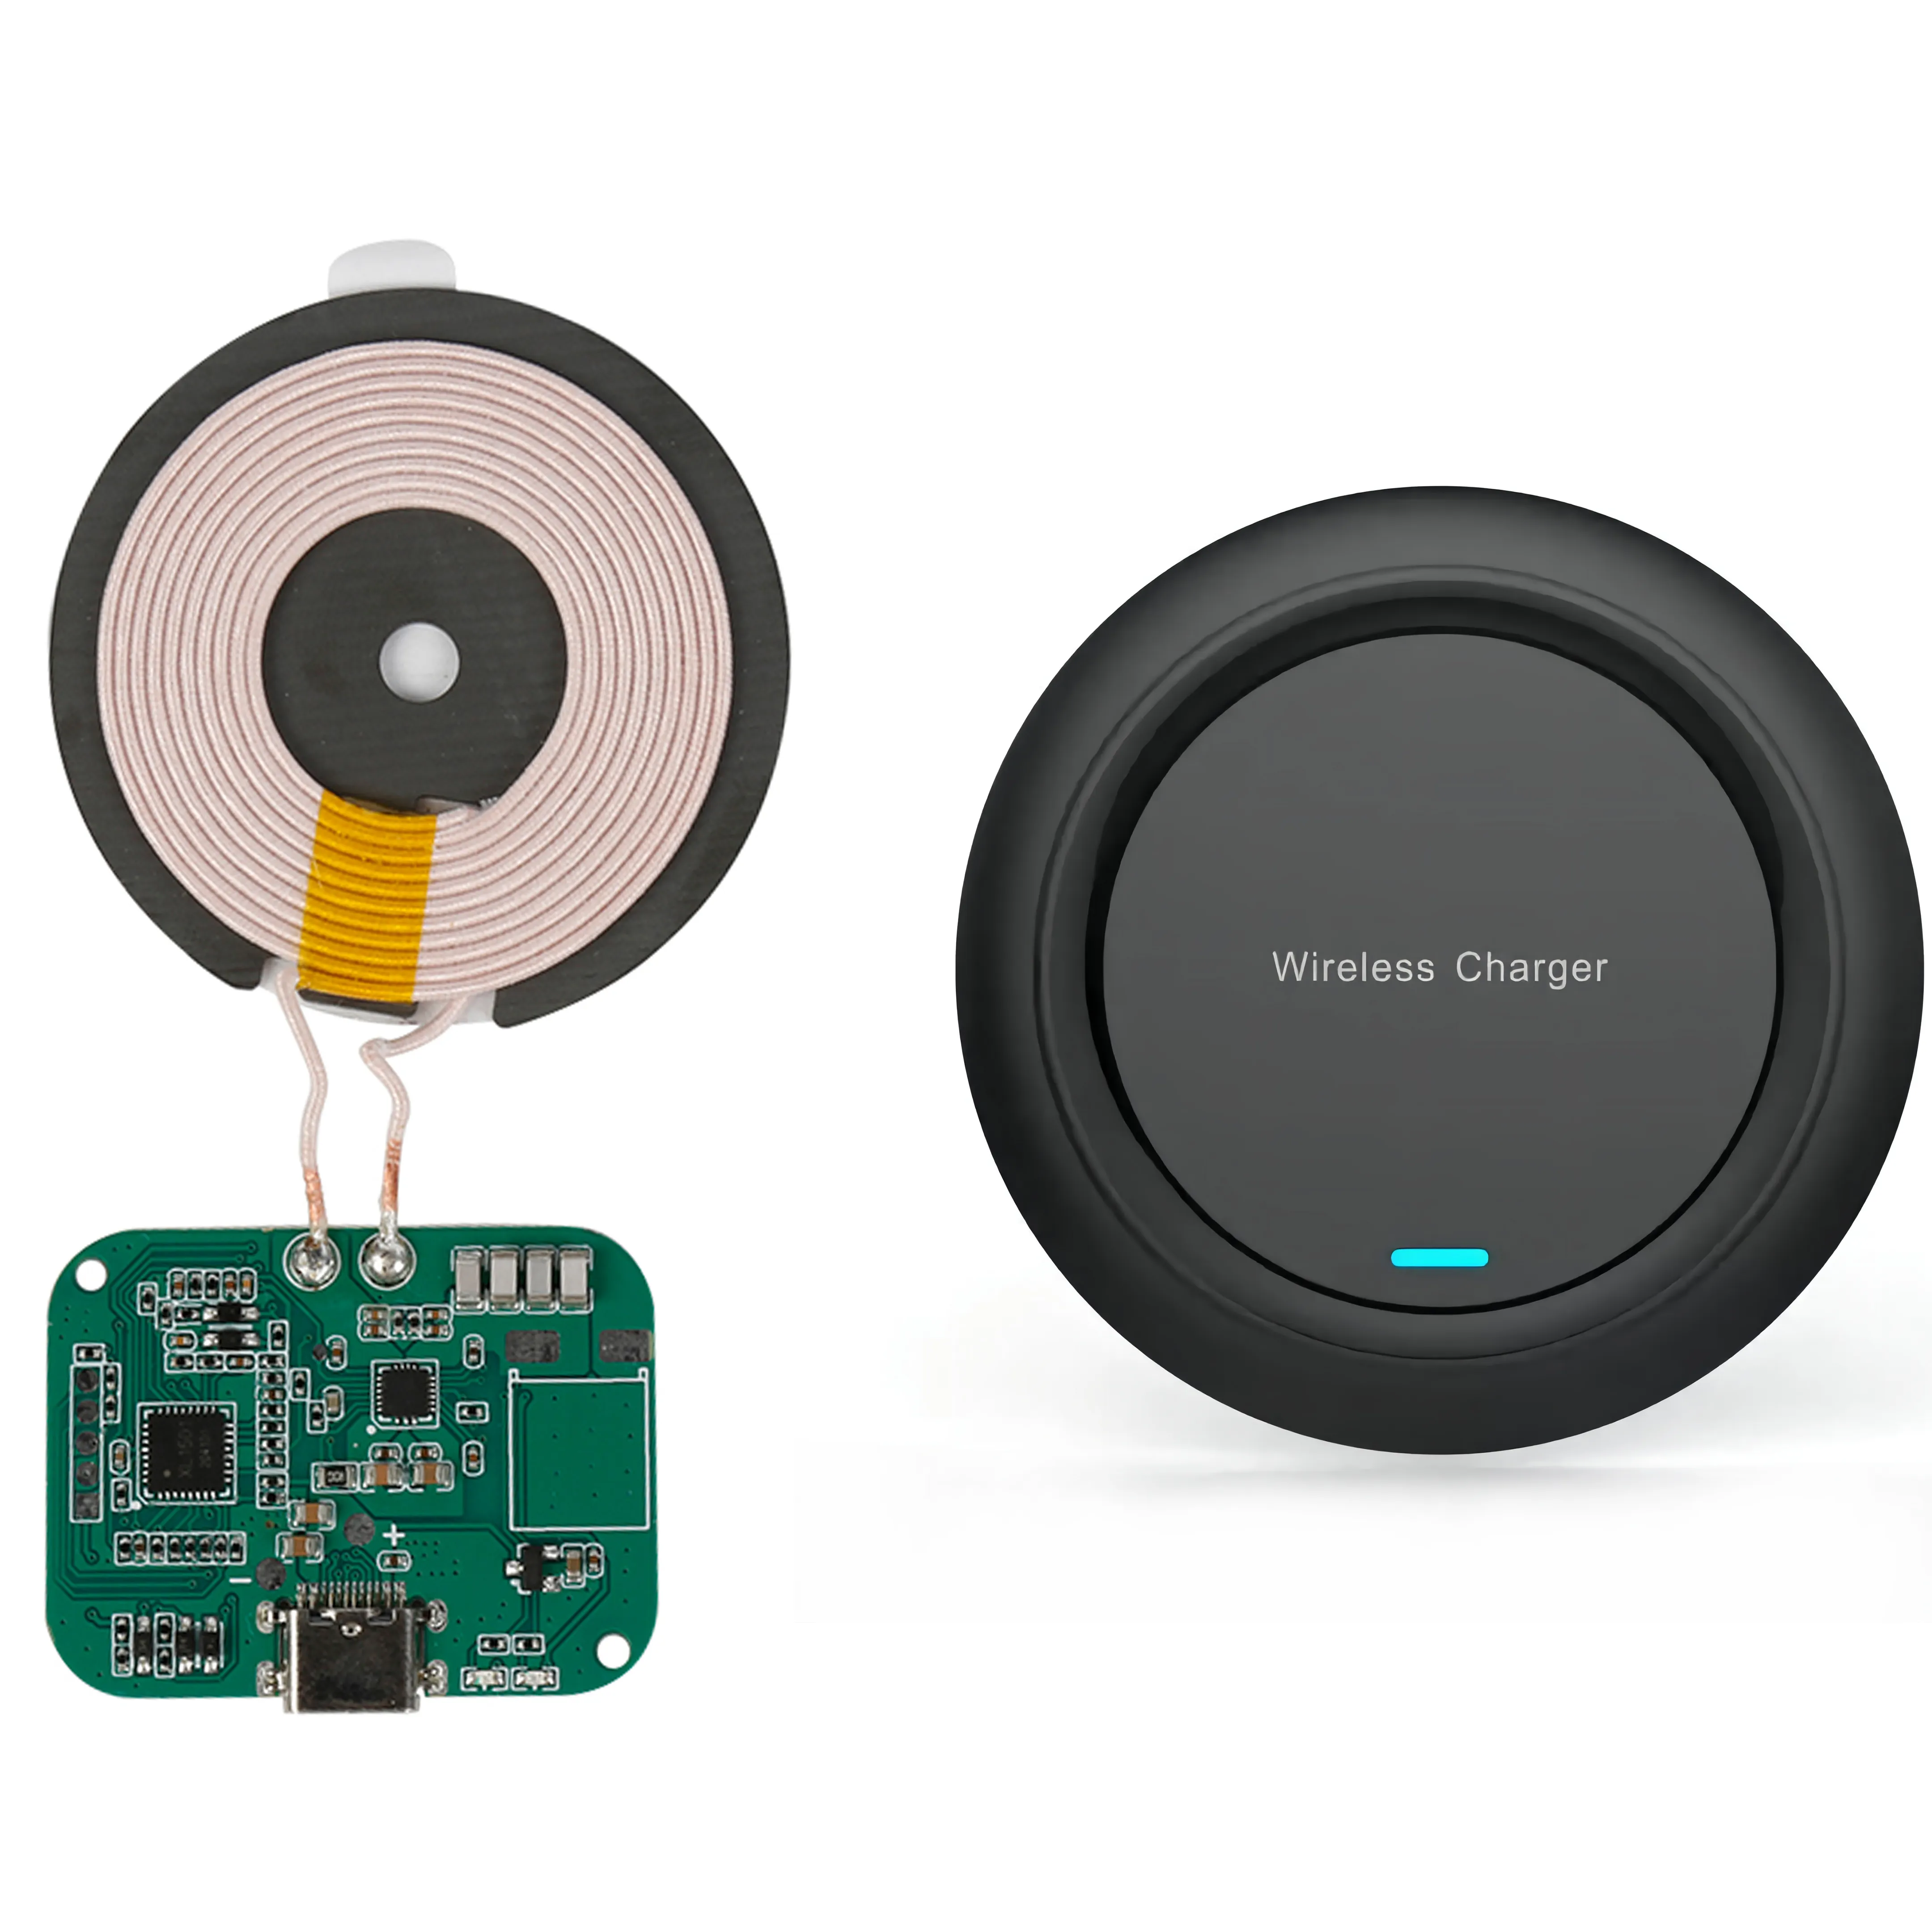 2.wireless charging transmitter receiver pcb module 15w Qi Standard Wireless Android Charger Transmitter Module